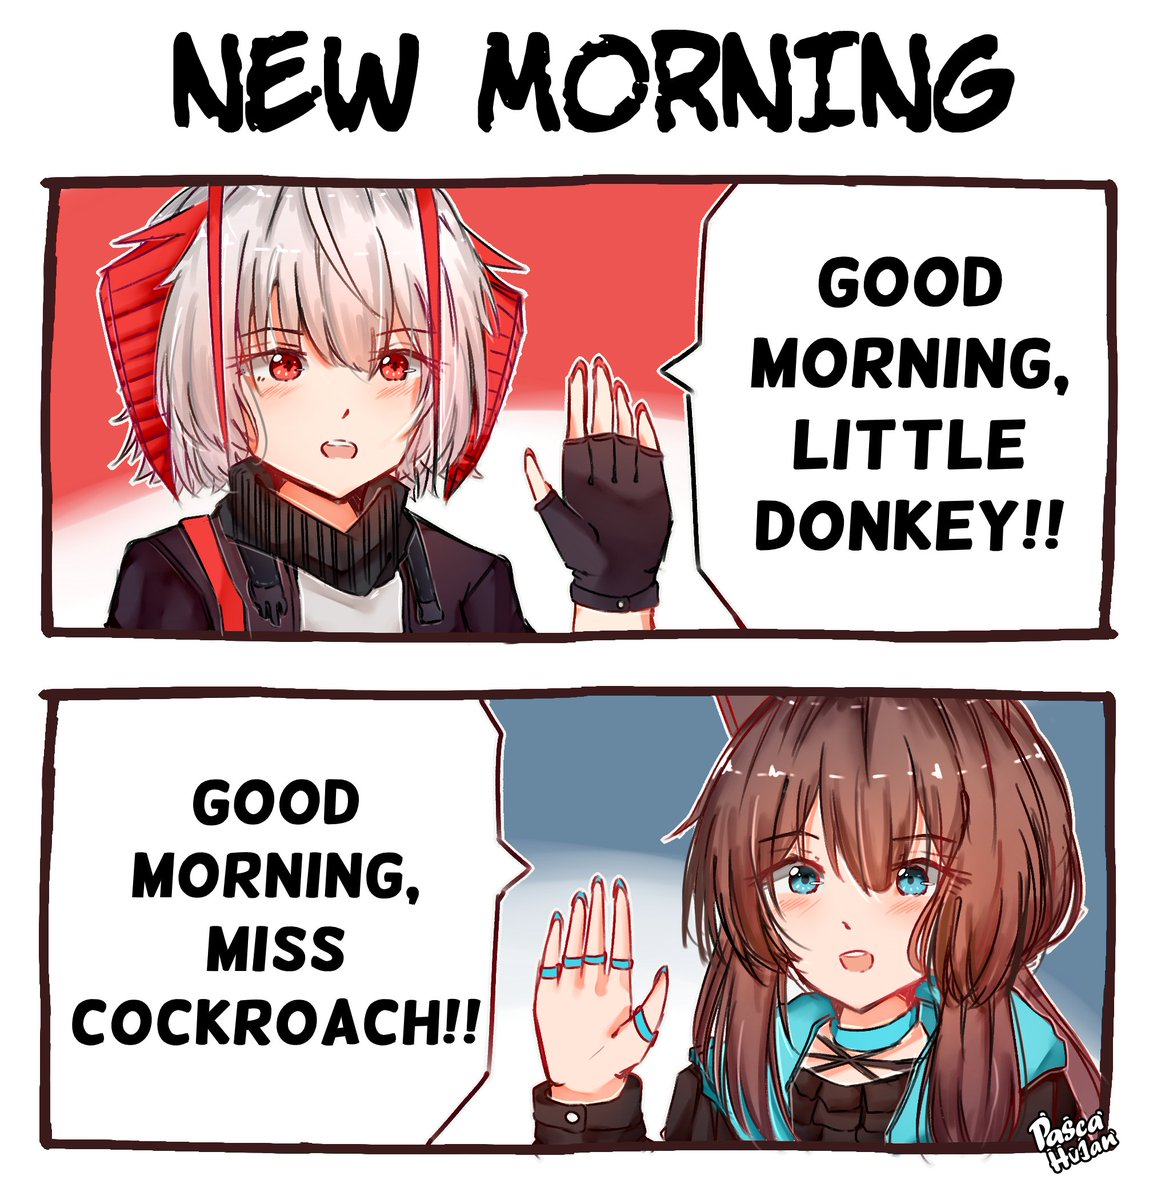 New Morning
---
#明日方舟 #アークナイツ #명일방주 #Arknights 
---
Morning in Rhodes Island won't be the same again since W came 